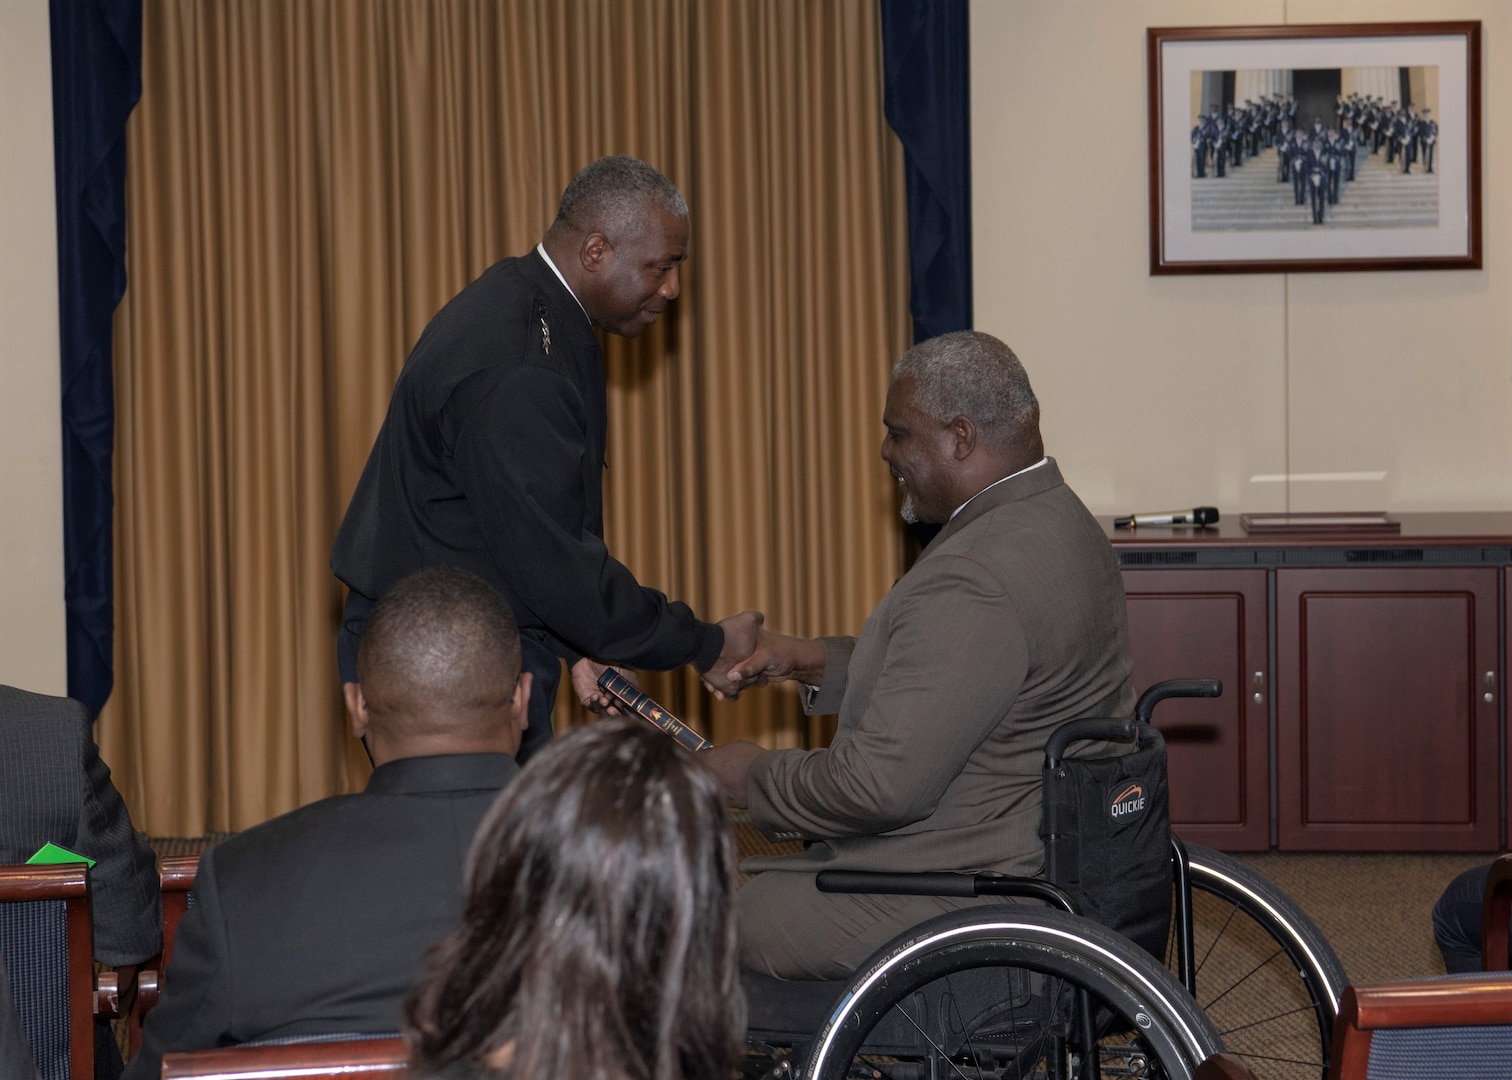 One man presents a book to another man in wheelchair.